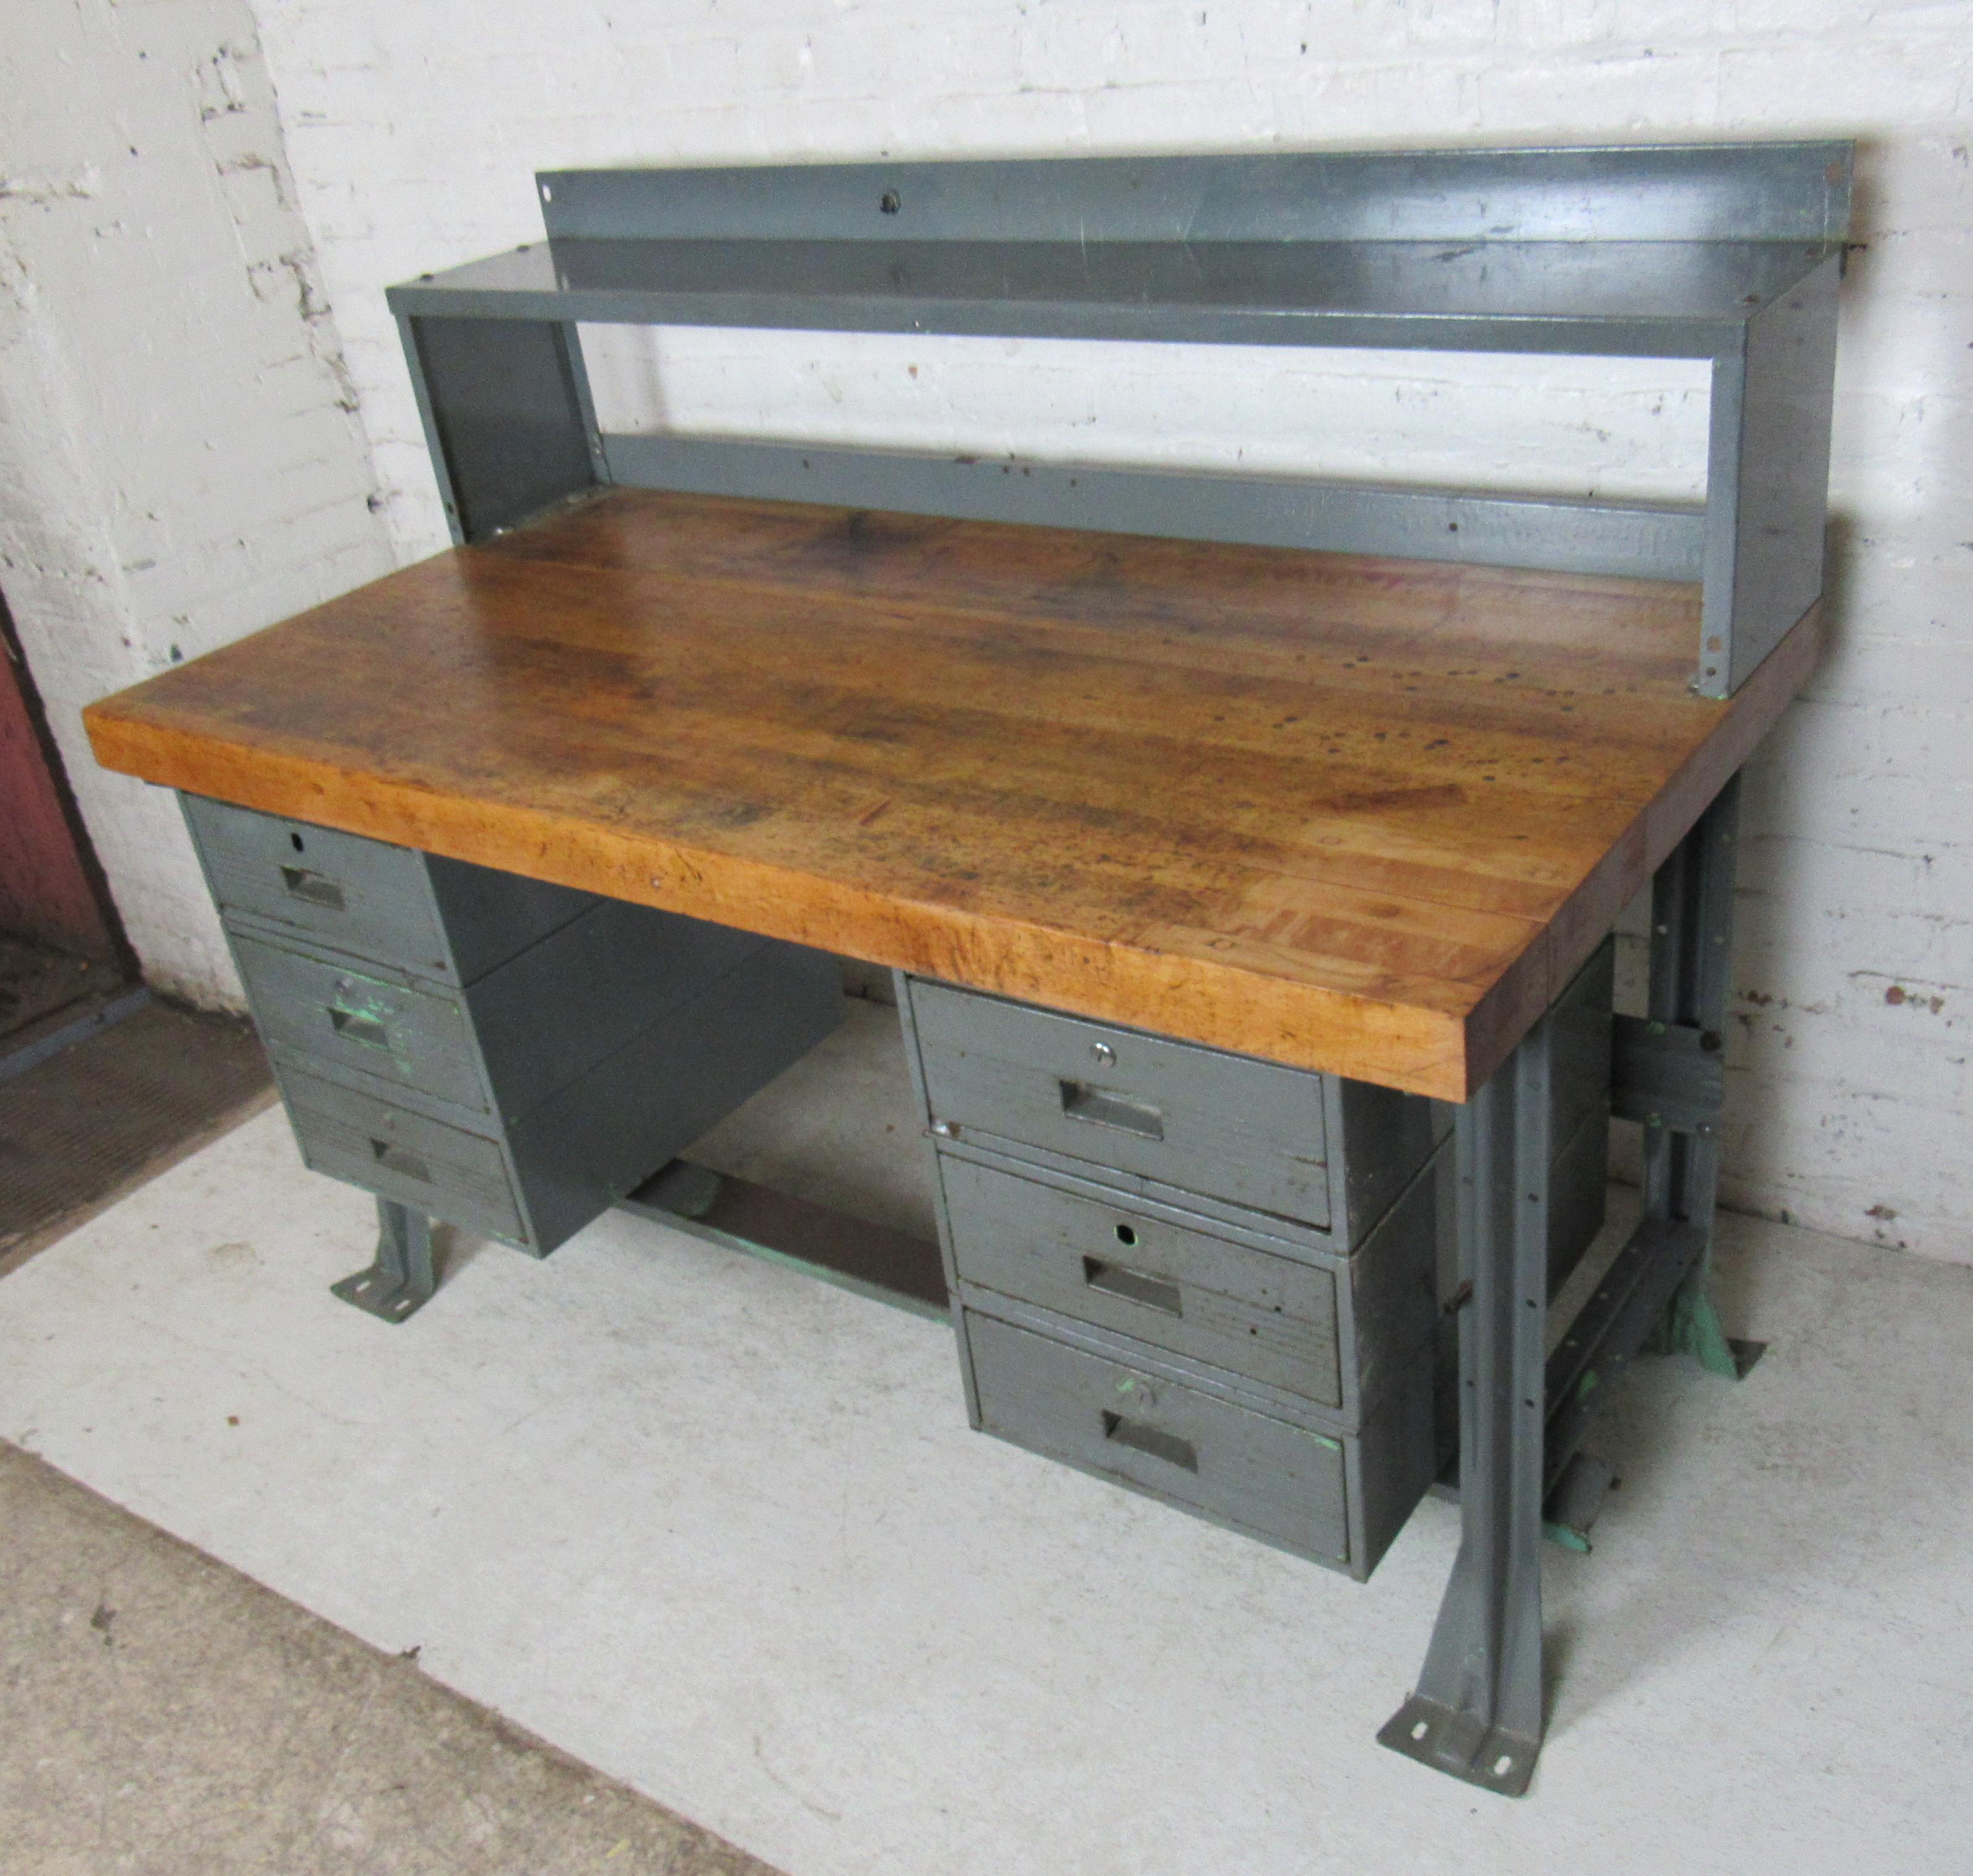 A large industrial-style desk that features a heavy butcher block surface for projects, and several metal drawers. This piece is full of character and built with sturdy quality.

(Please confirm item location - NY or NJ - with dealer).